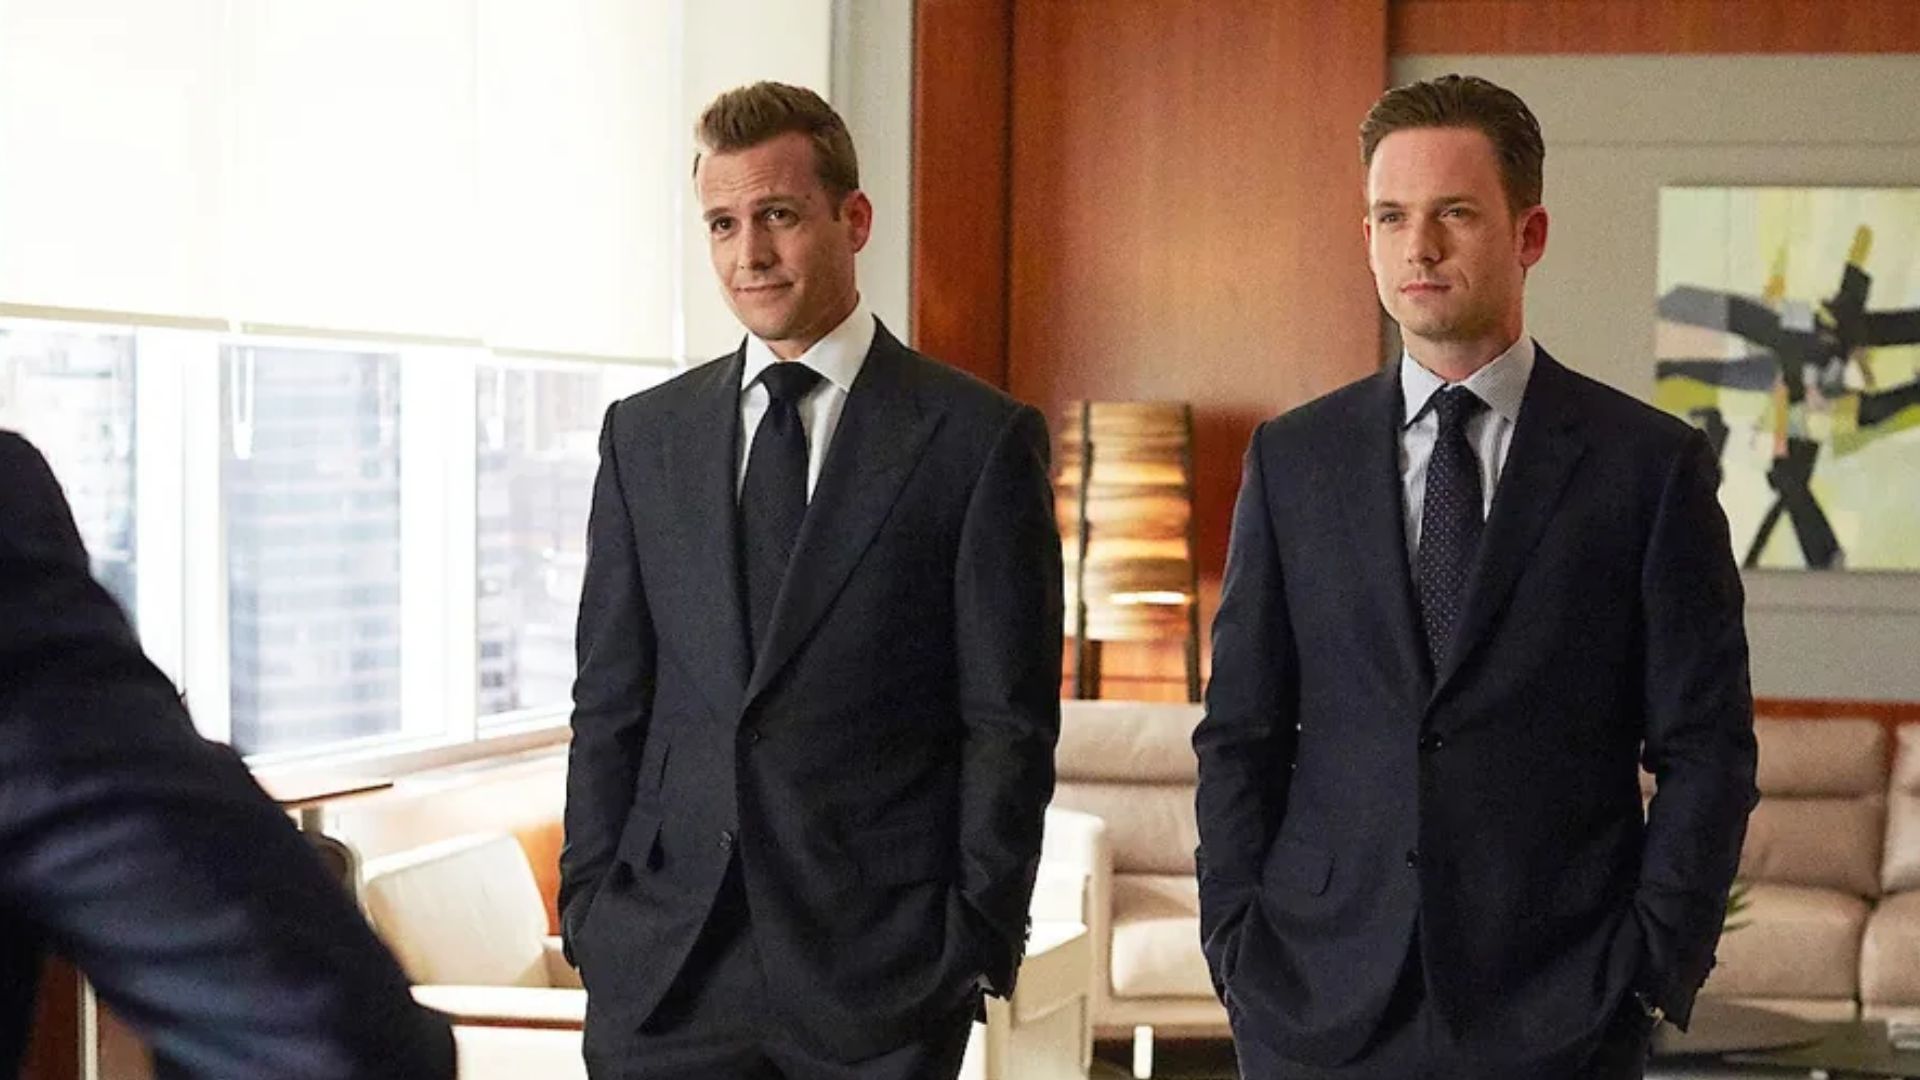 Stephen Amell to headline ‘Suits’ spinoff, ‘Suits: LA’